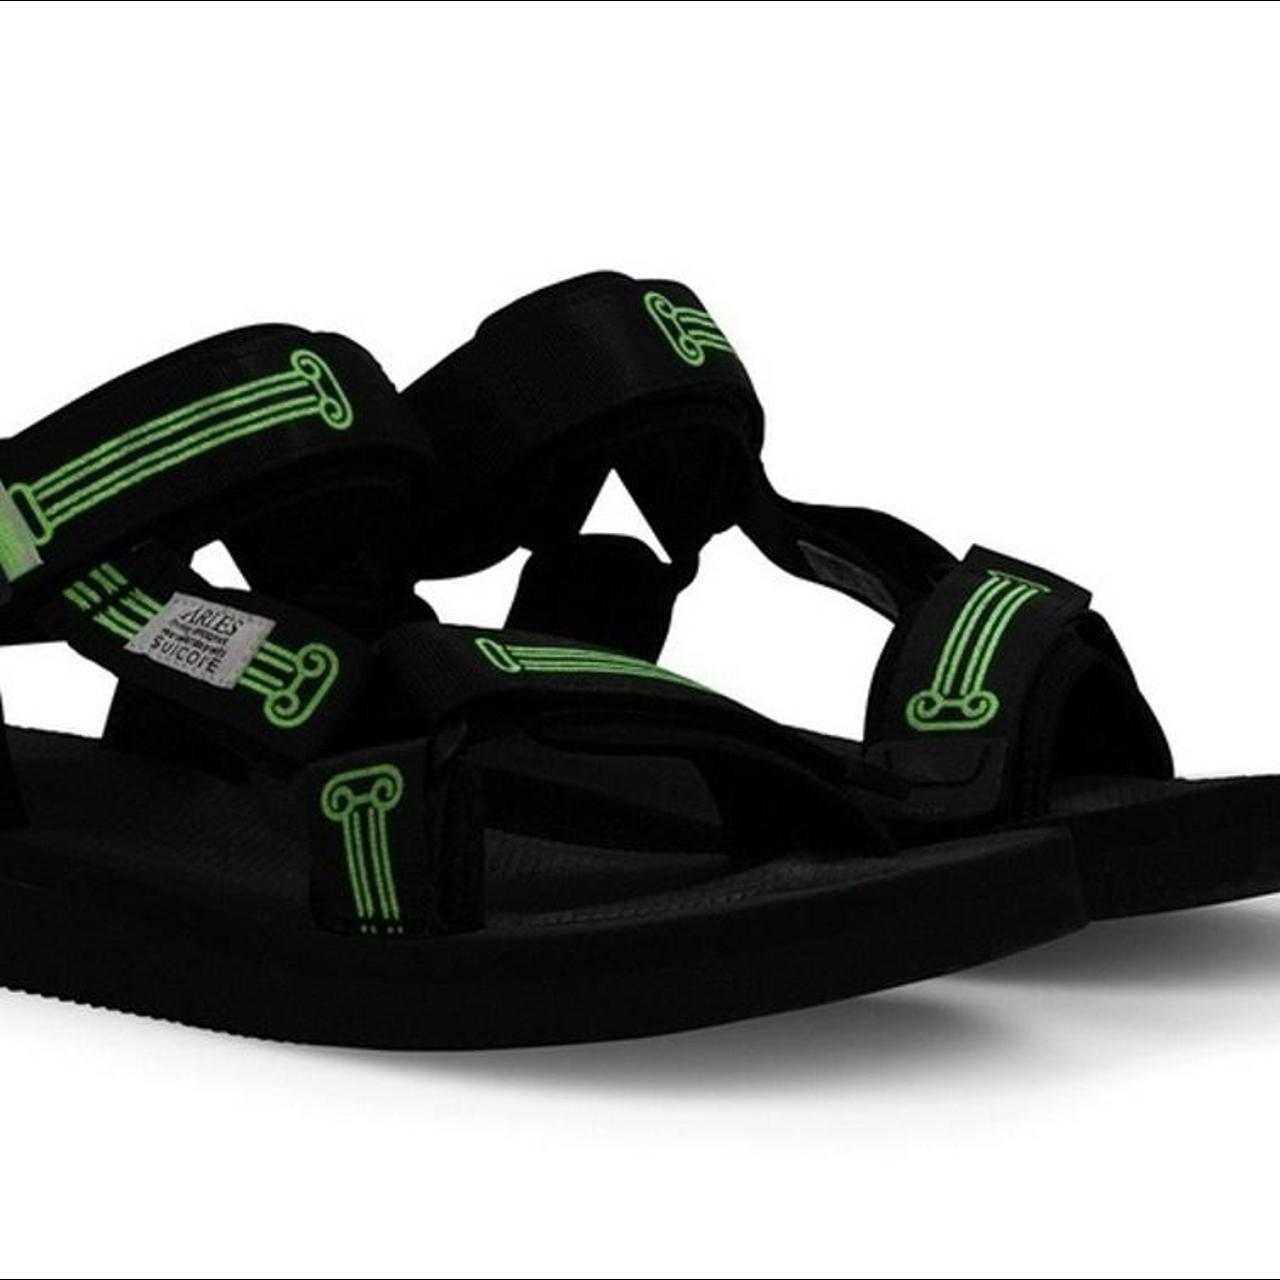 Aries Men's Black and Green Sandals